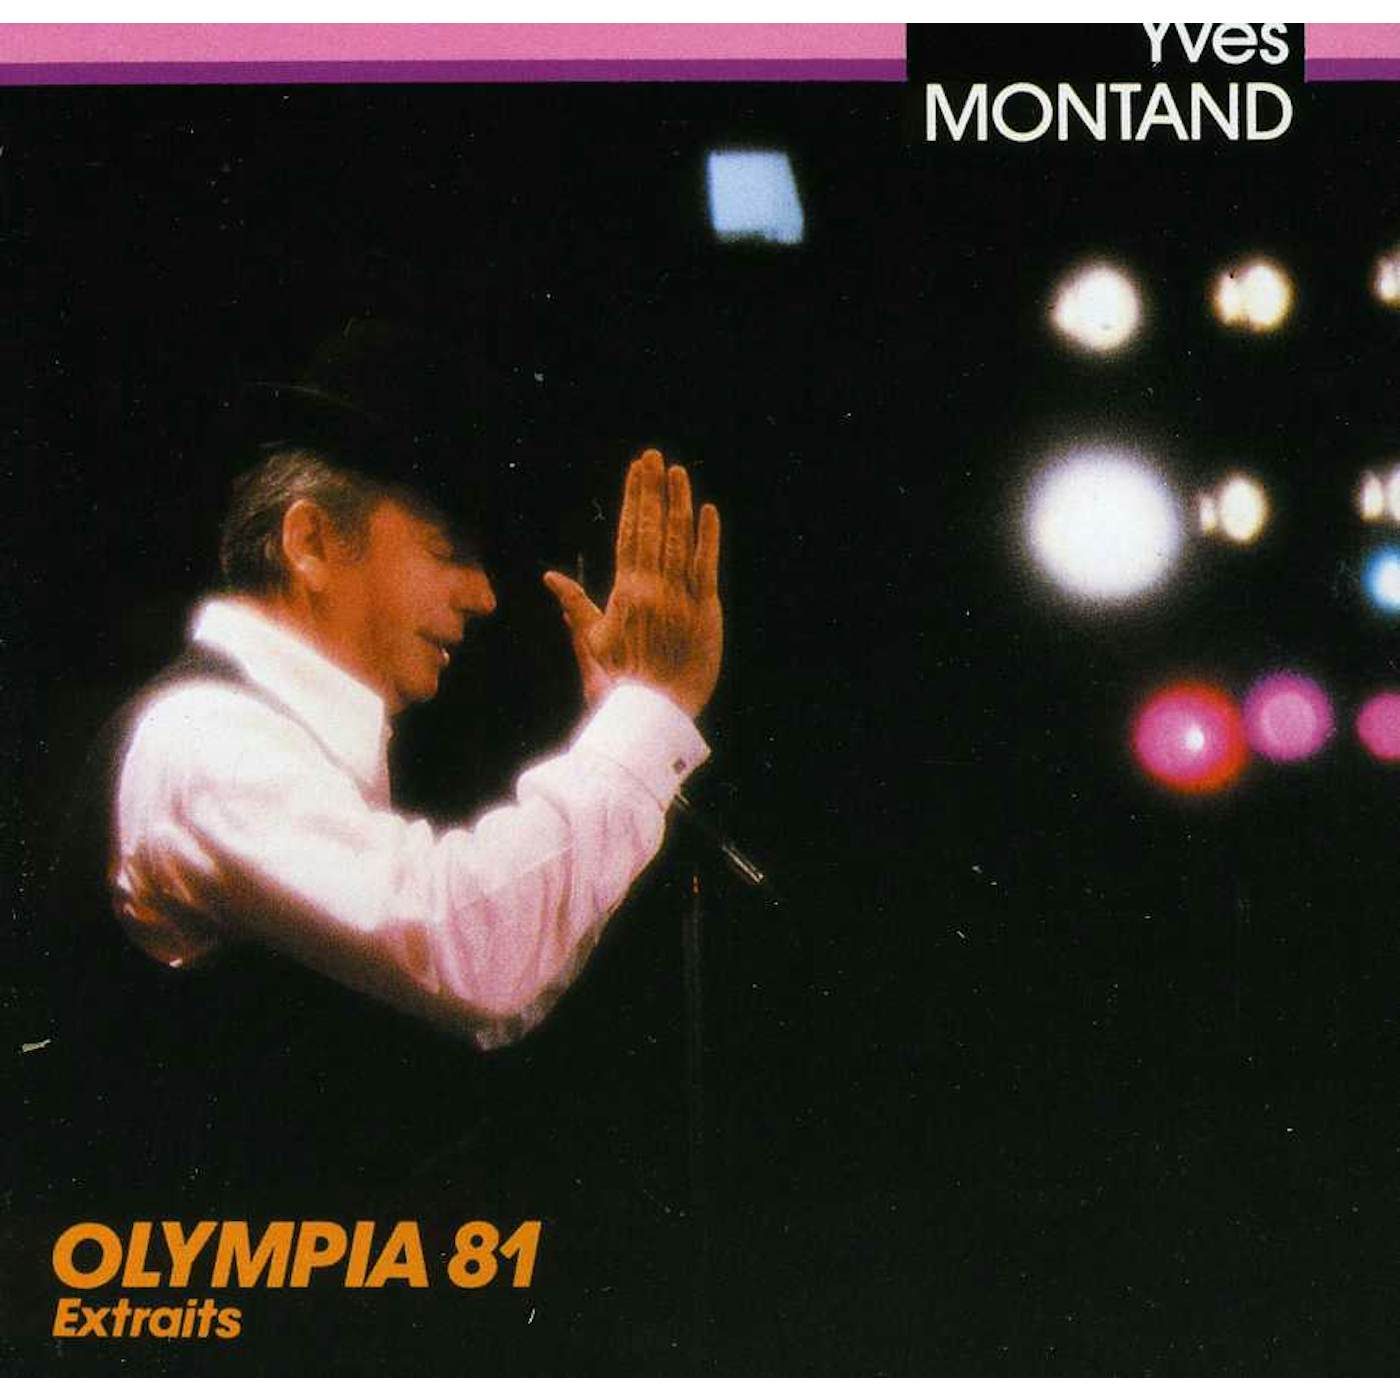 Yves Montand OLYMPIA 81: EXTRAITS CD